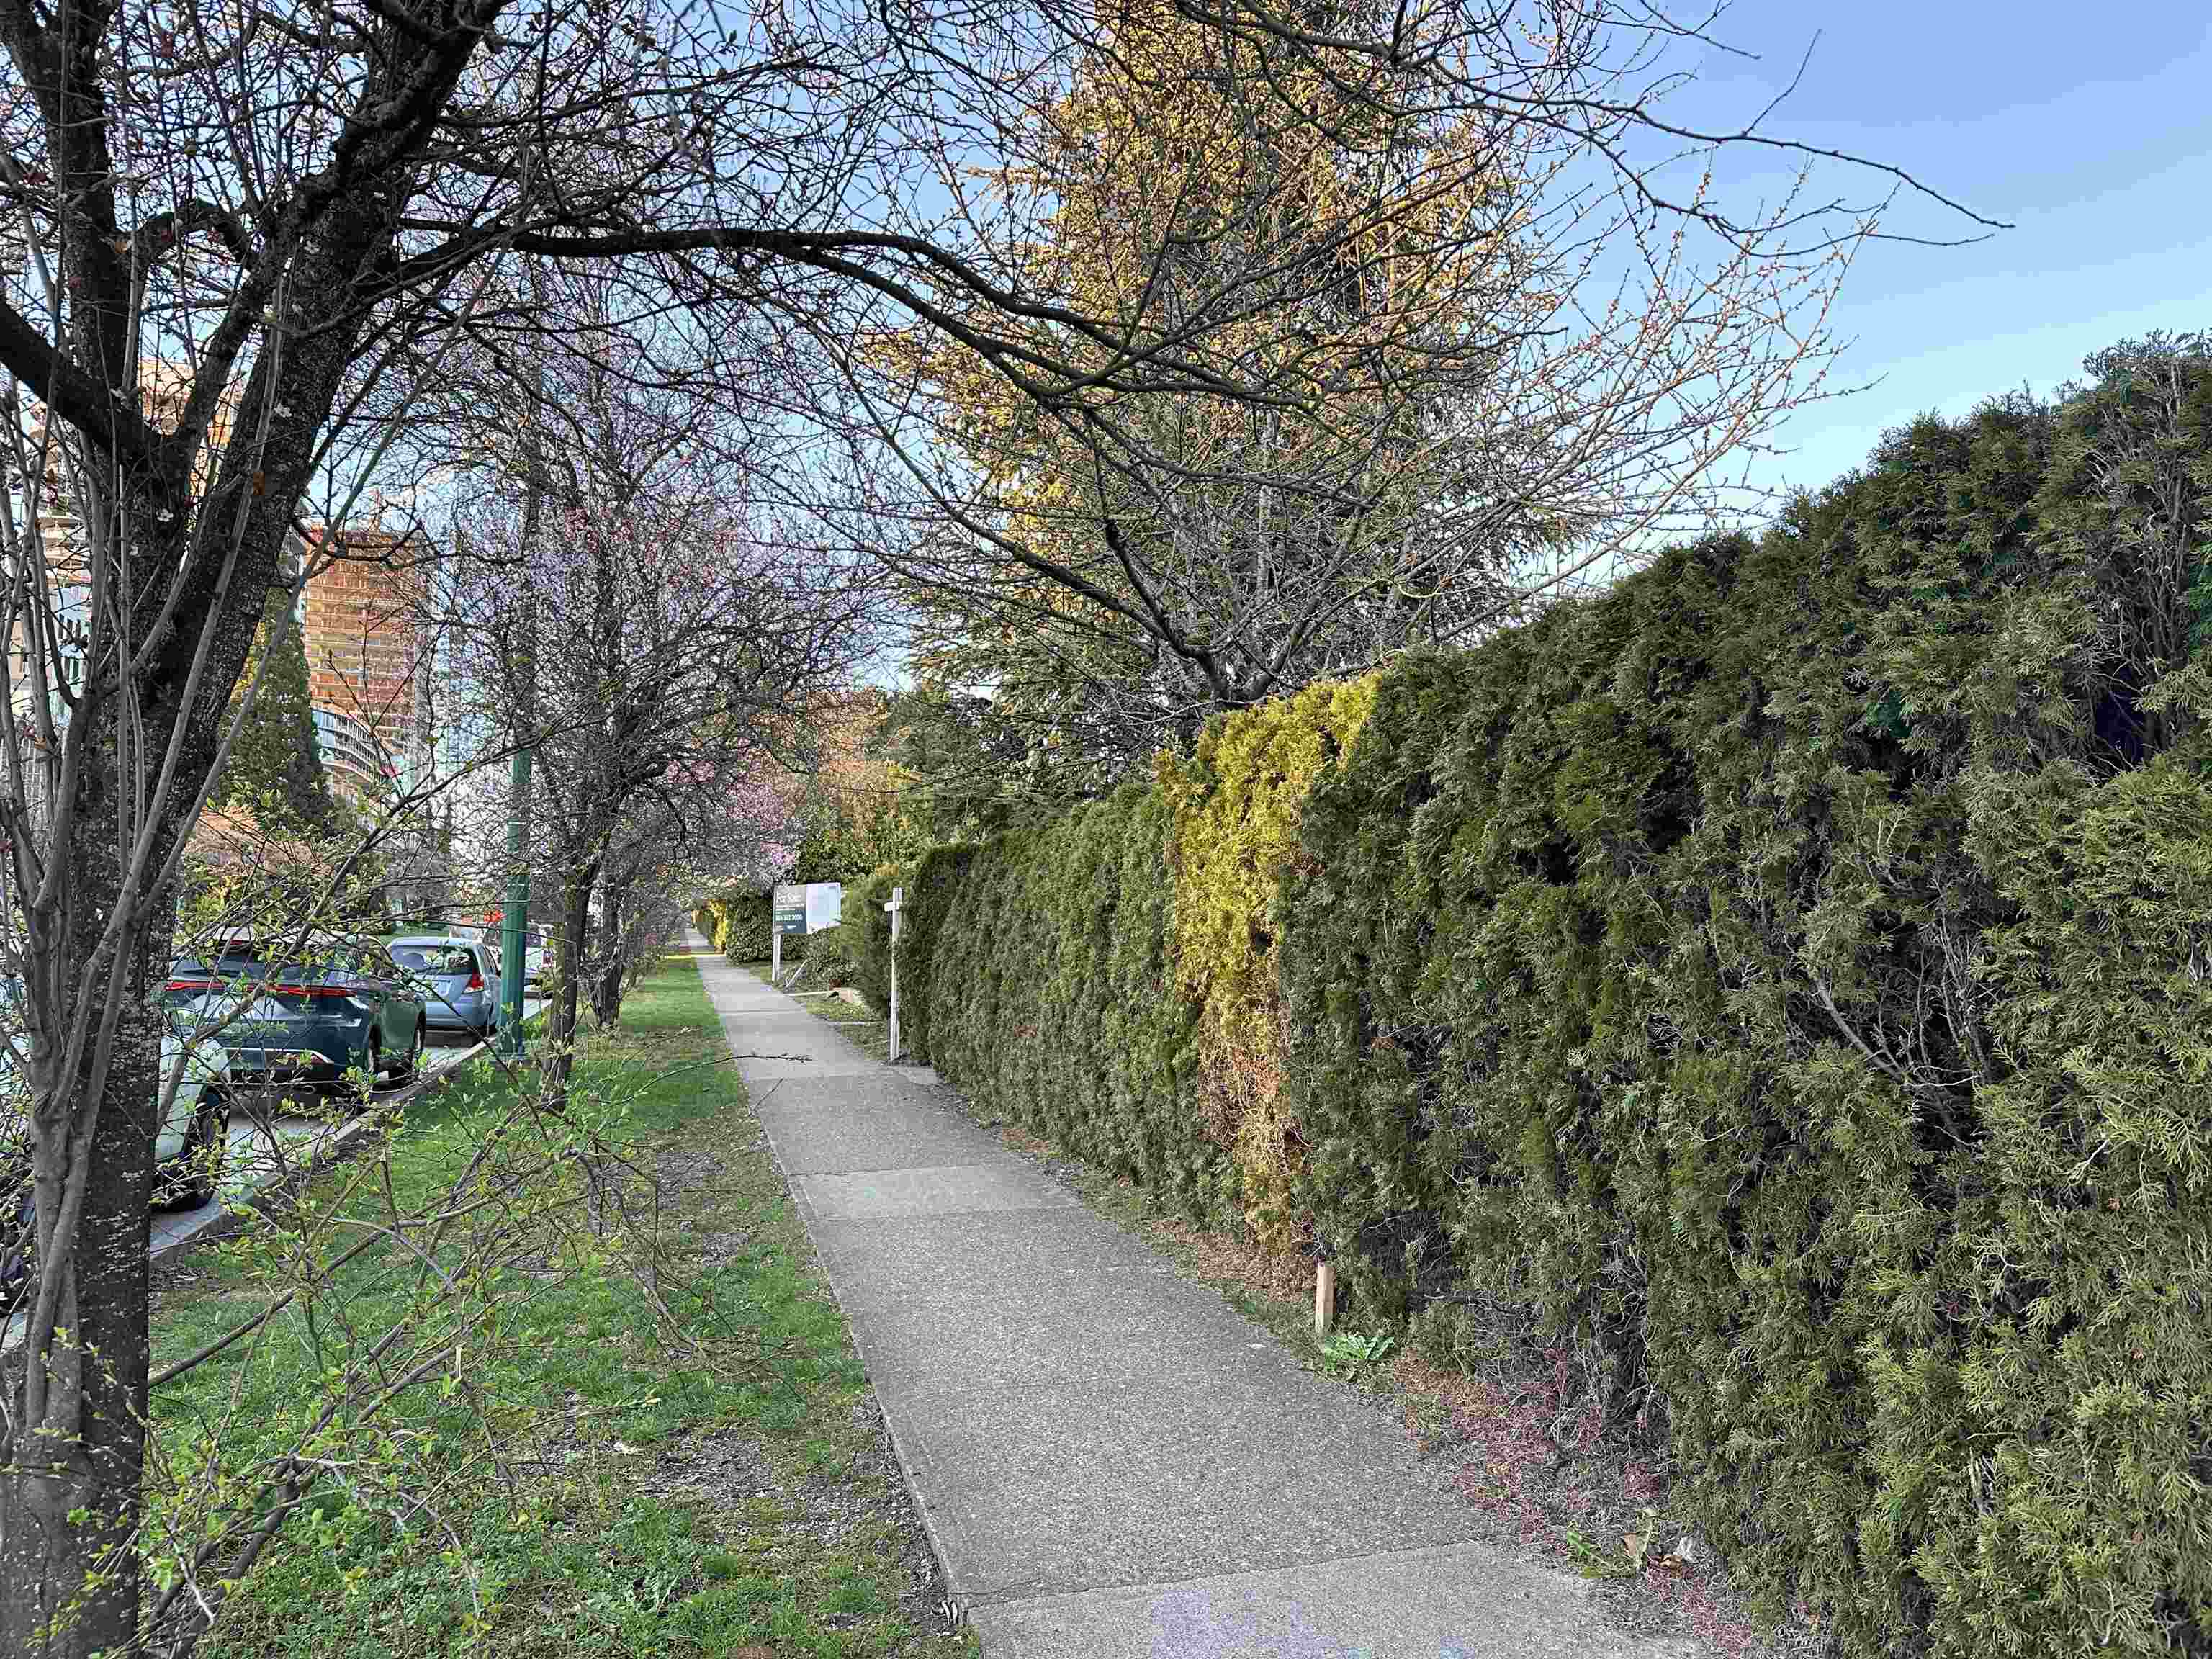 Listing image of 6298 CAMBIE STREET